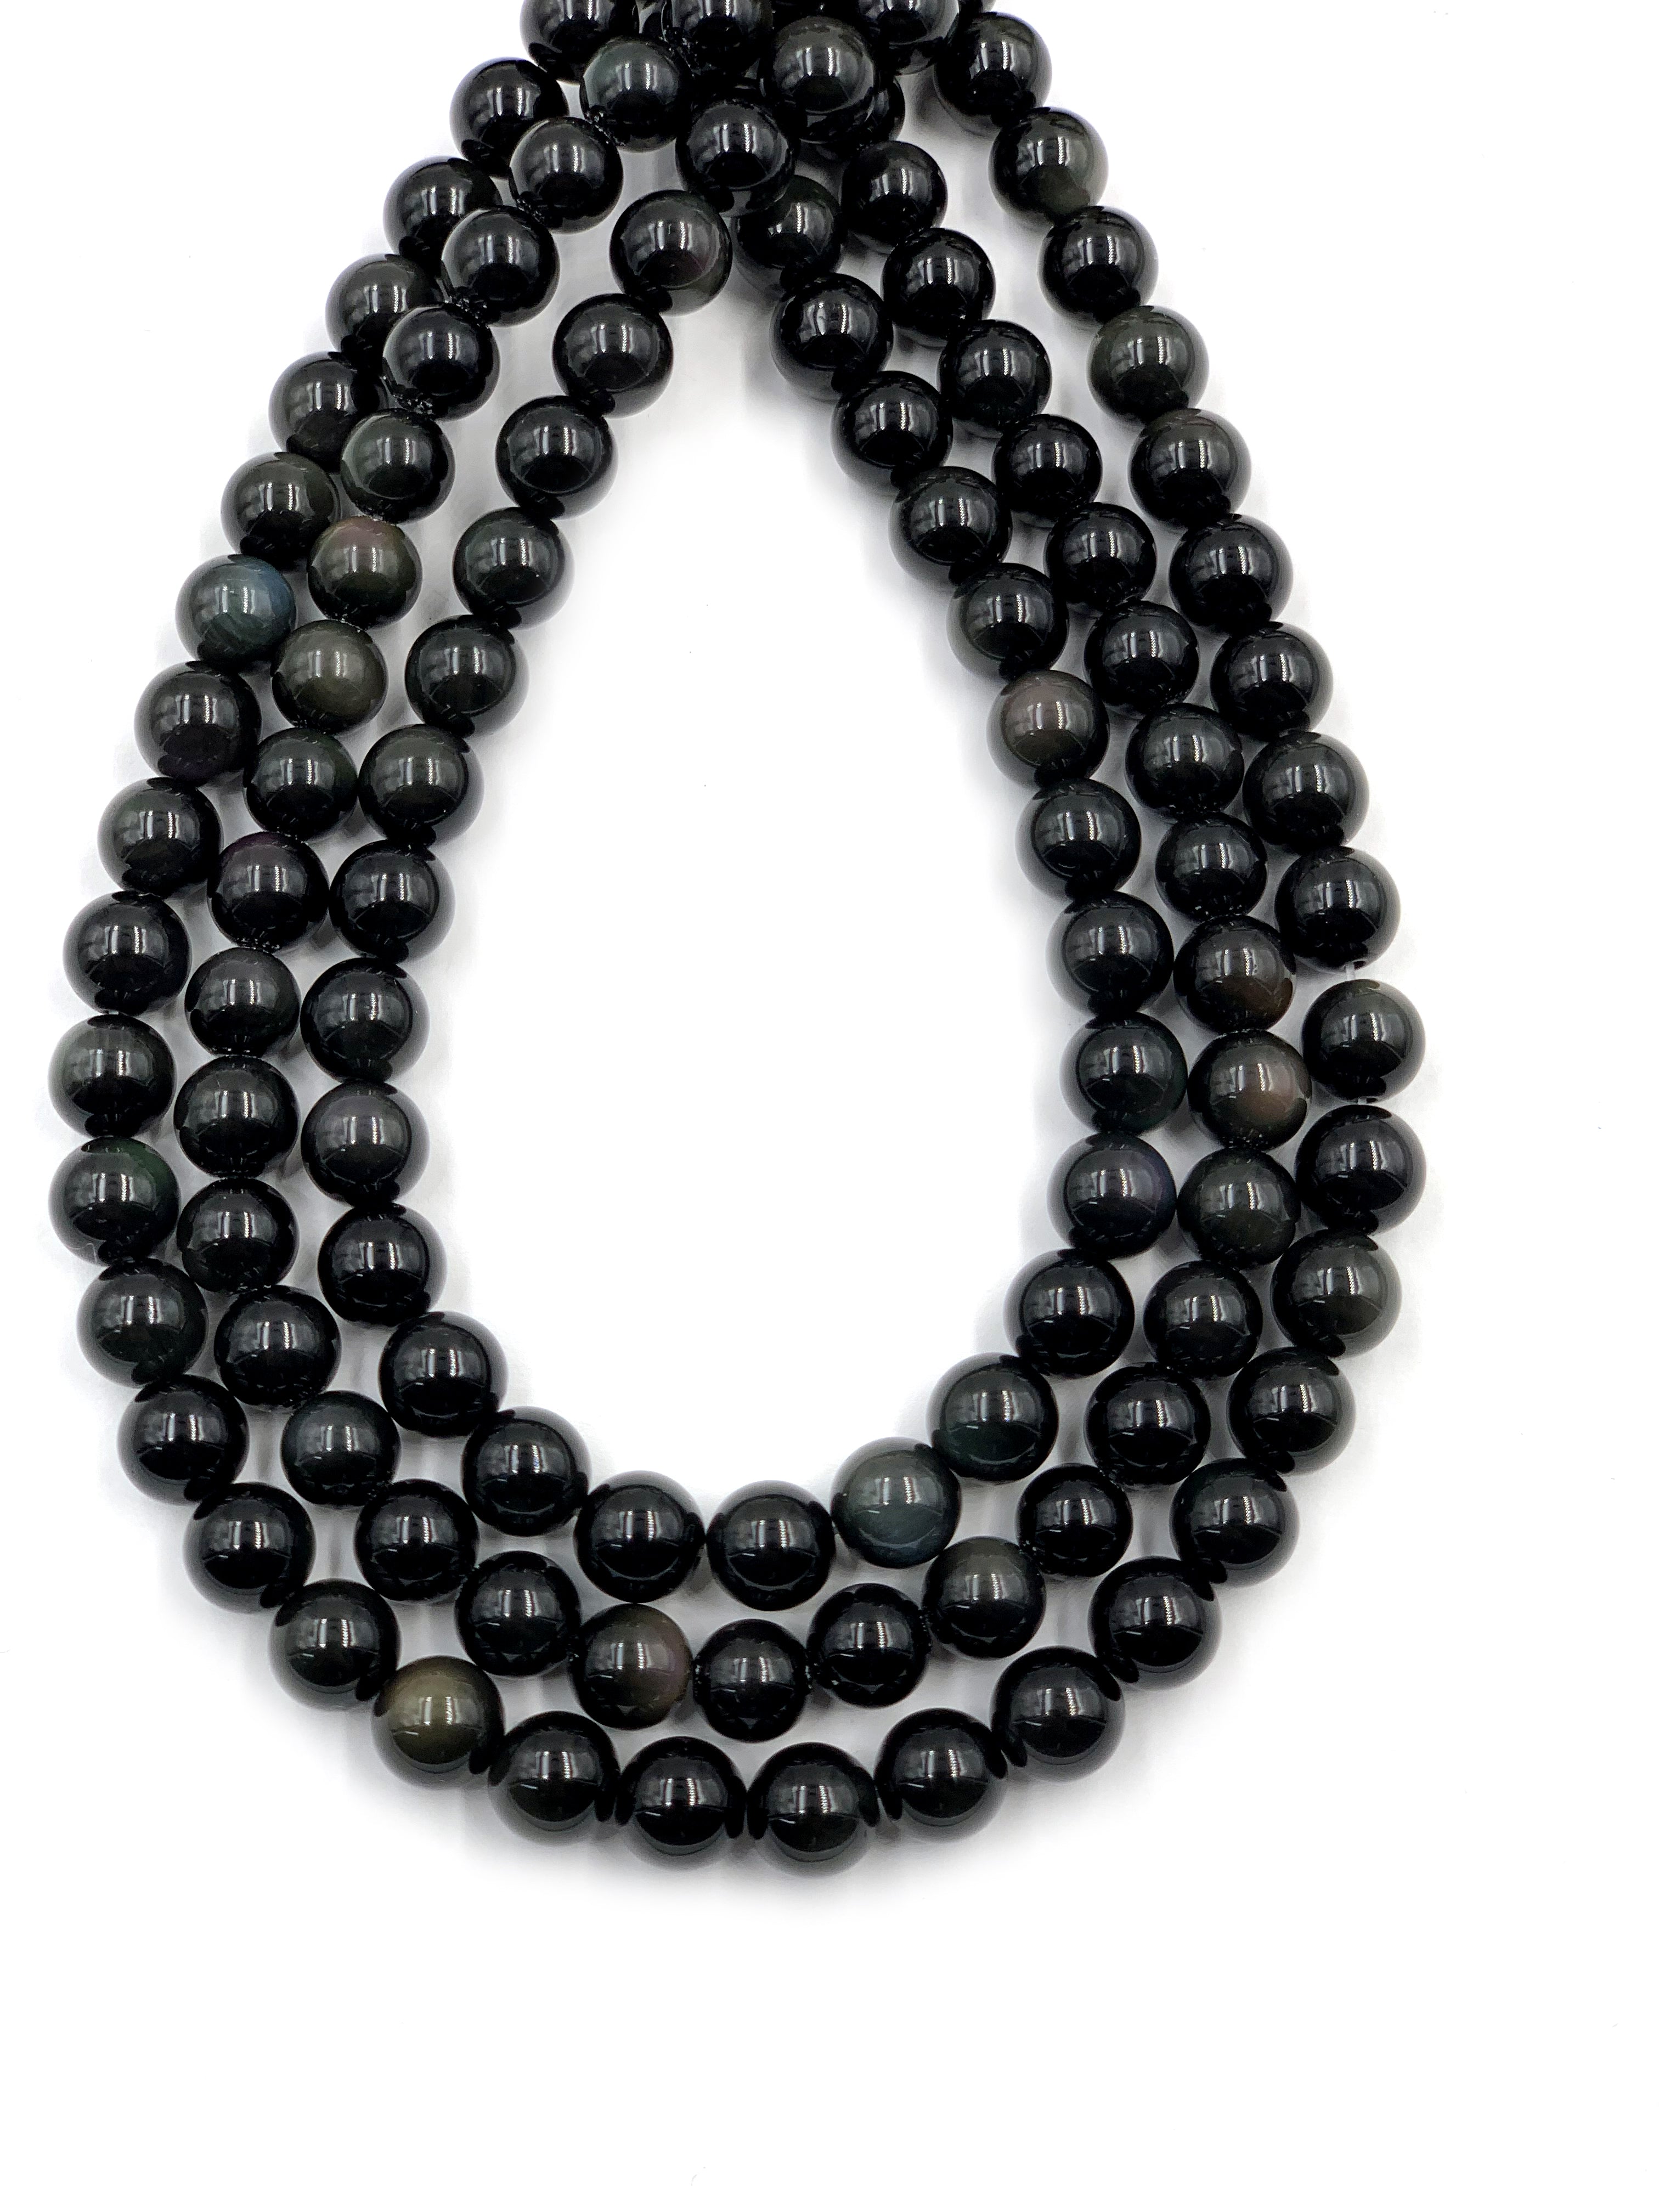 12 MM Rainbow Black Obsidian Smooth Round Beads 15 Inches Strand